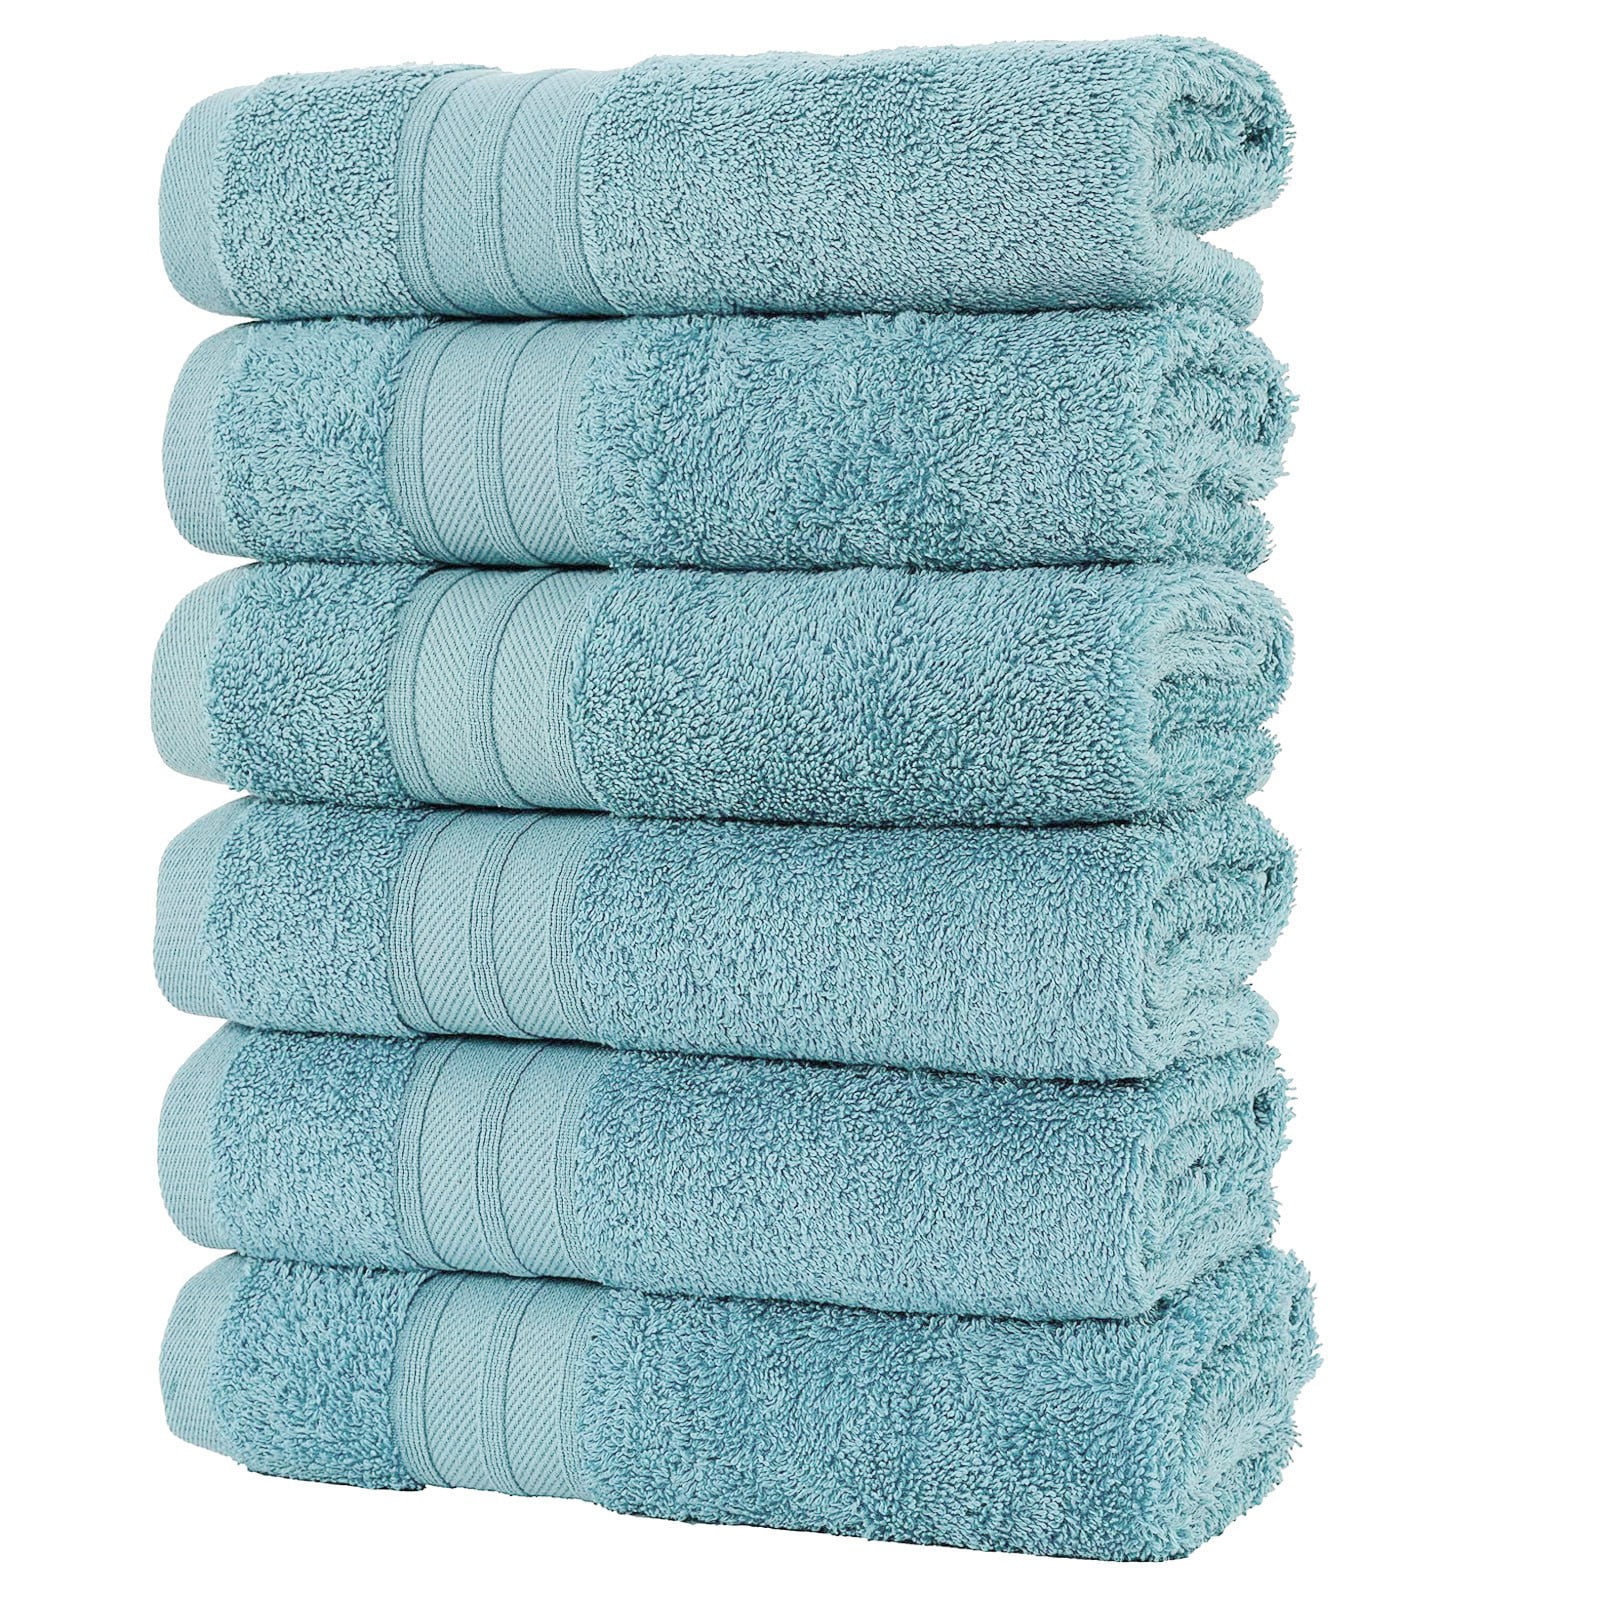 6X Hand Towels Soft Cotton Fluffy Thick Multipurpose Towel Set 600 GSM Quick Dry 